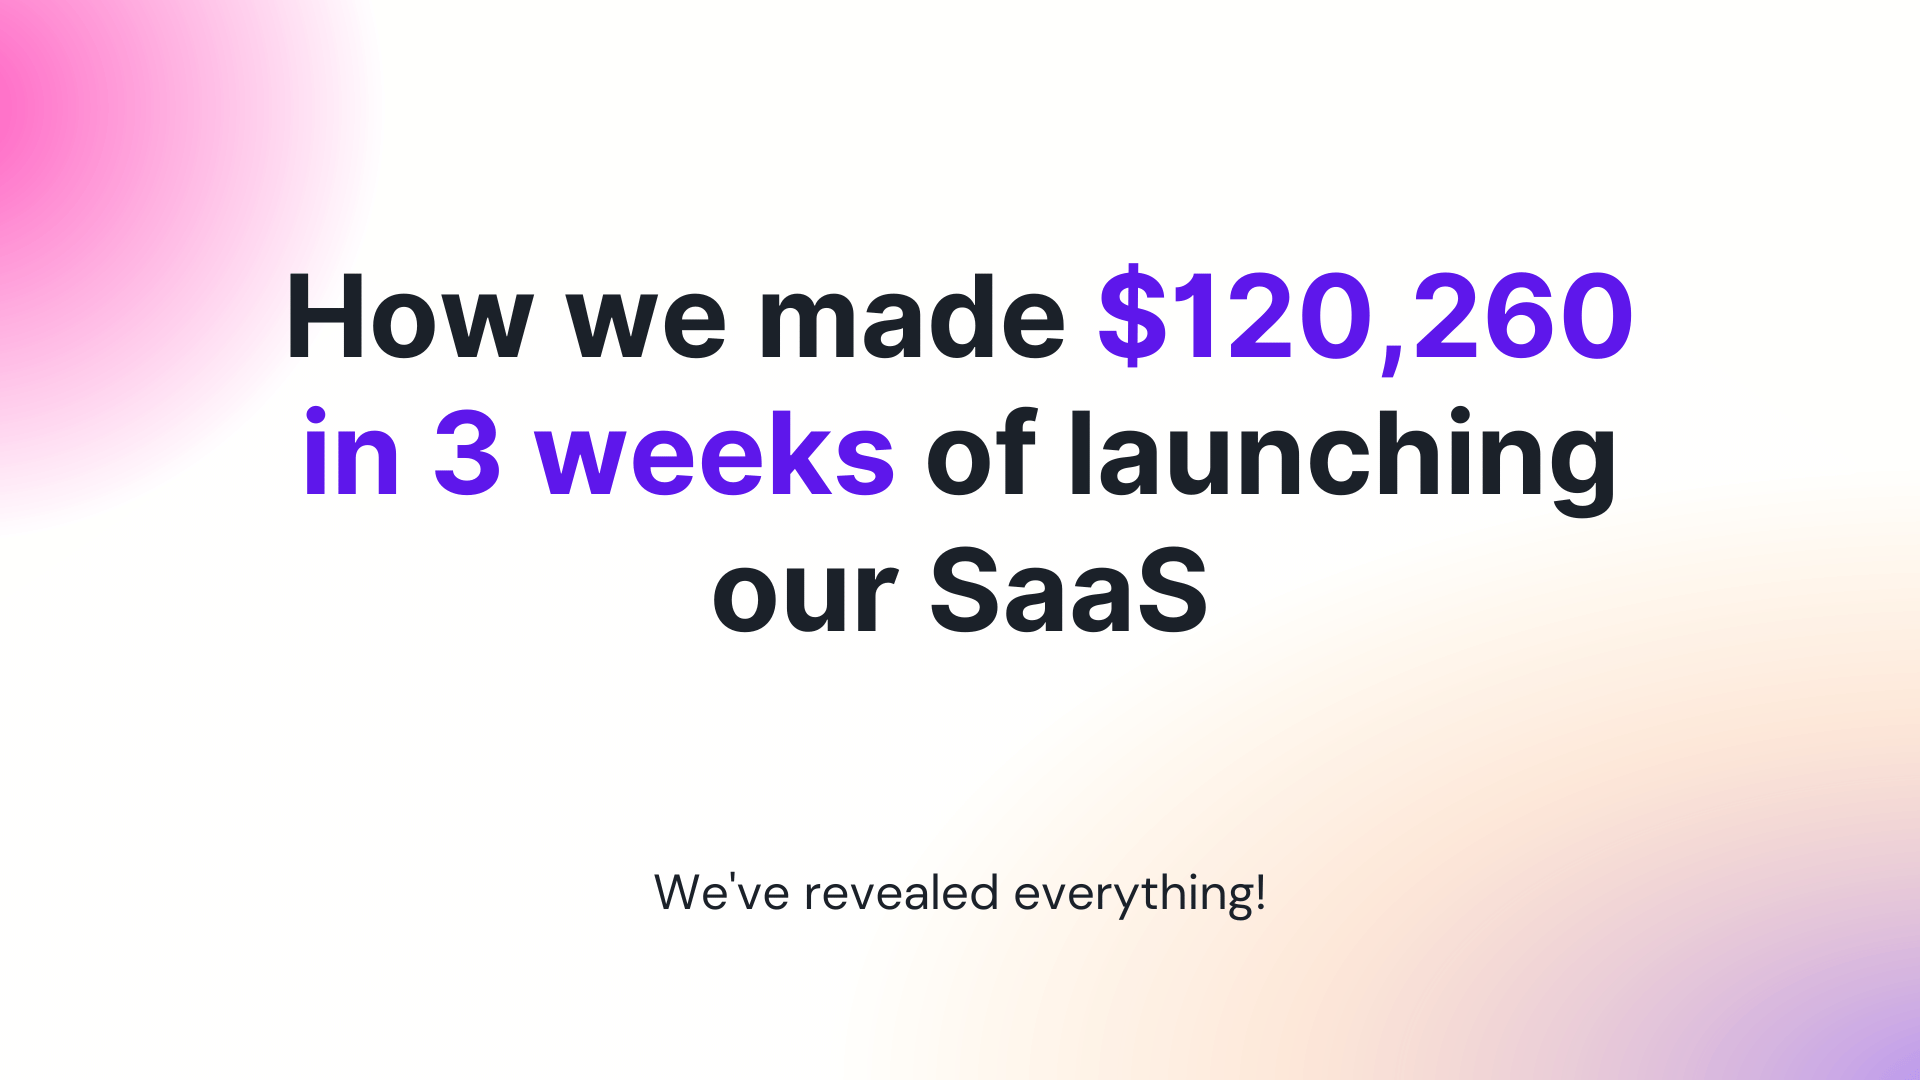 How we made $120,260 in 3 weeks of launching our SaaS